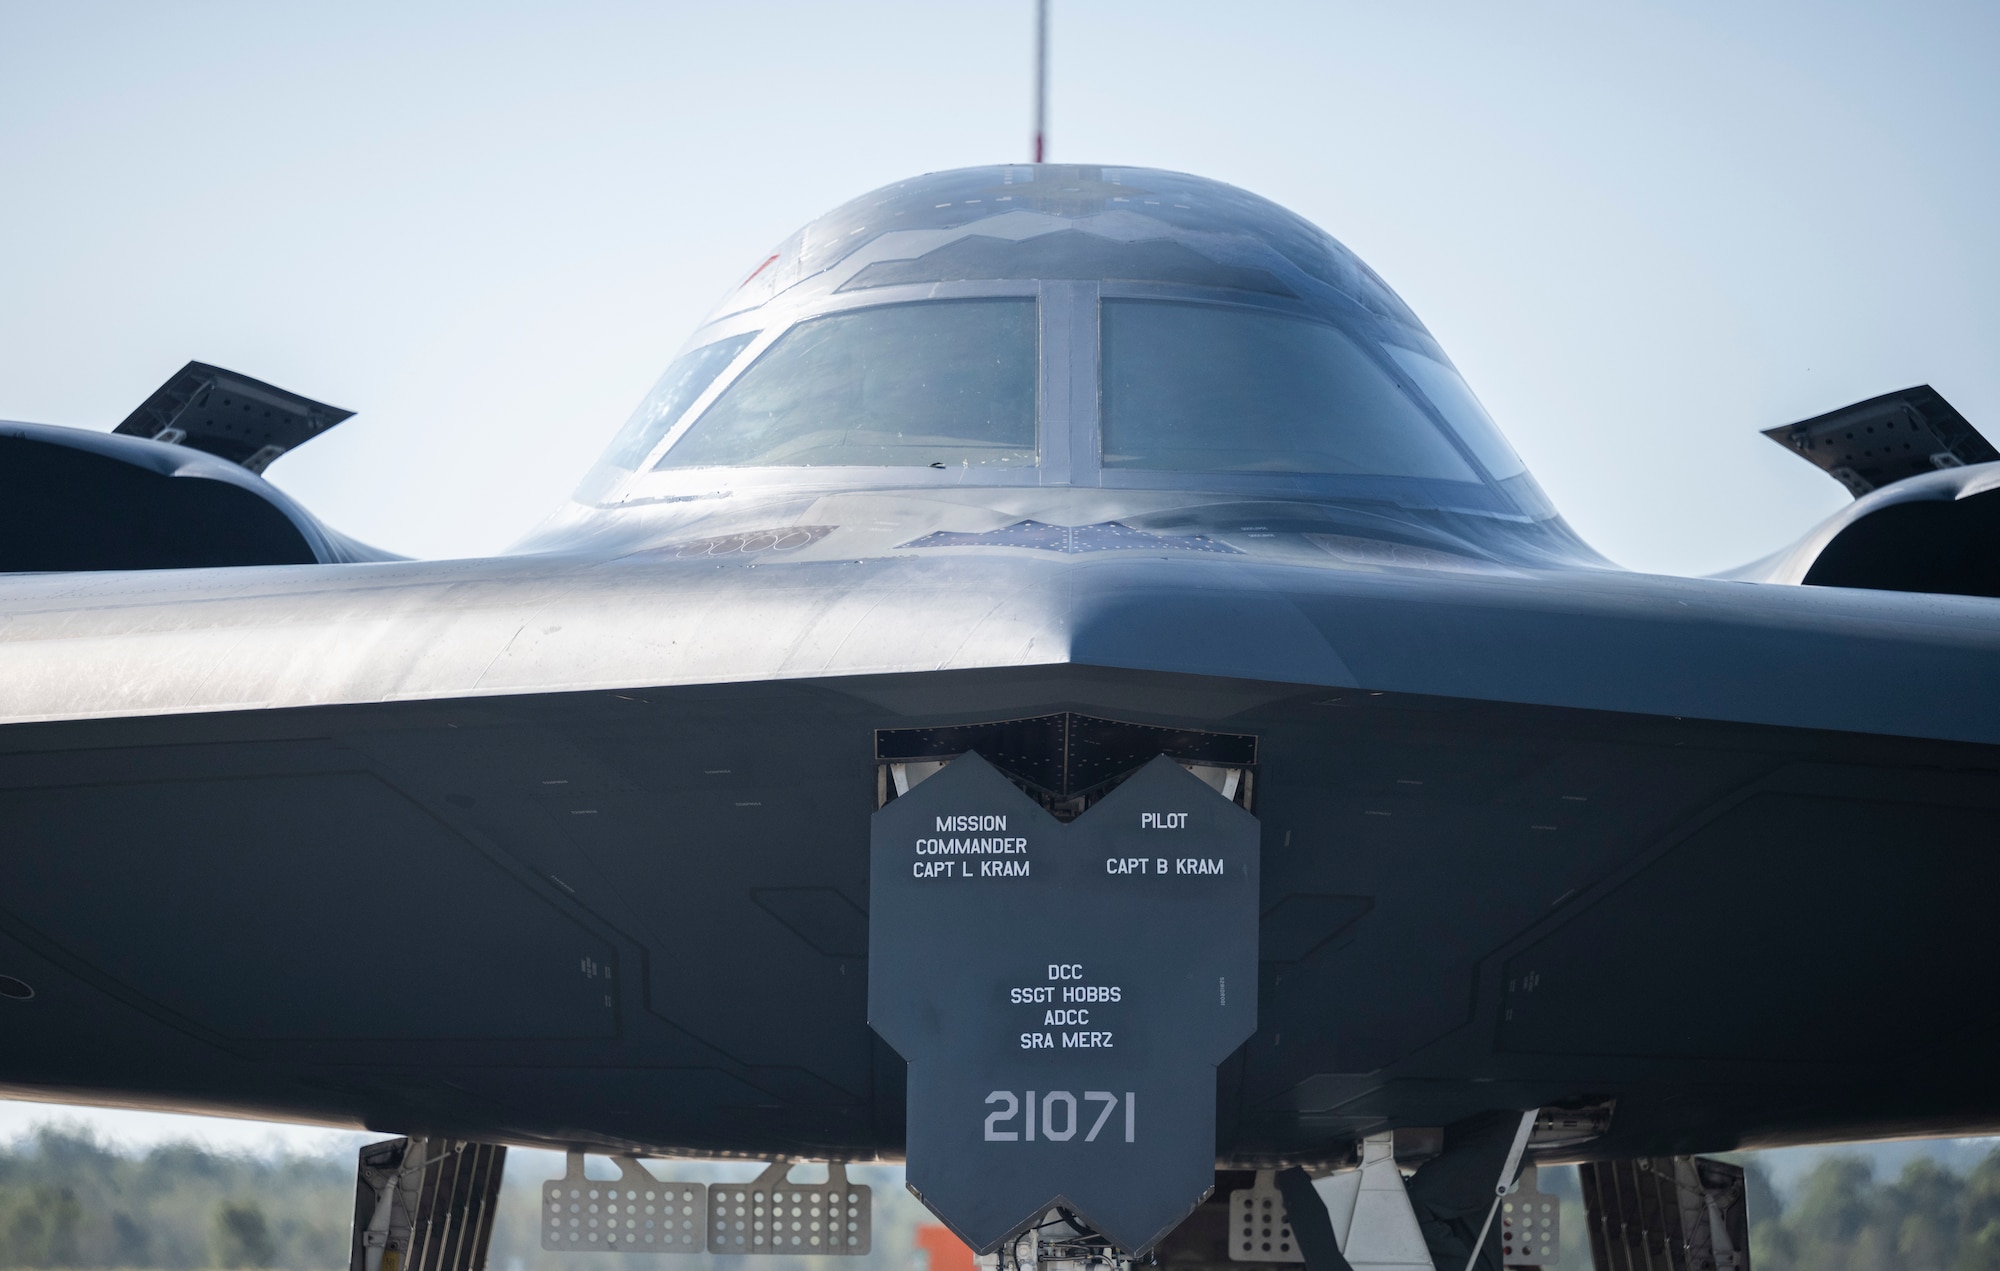 A B-2 Spirit sits at Royal Australian Air Force Base Amberley, Aus. After conducting integration with RAAF and U.S. fighters during a CONUS-to-CONUS training mission in the Indo-Pacific region, March 23, 2022. After integrating in Australian airspace, the B-2 pilots landed at Amberley—for the first time ever—and conducted a crew swap on the ground before becoming airborne and integrating with F-22 Raptors from Joint Base Pearl Harbor-Hickam, Hawaii, then returning back to Whiteman. Enhanced Air Cooperation improves our ability to train and operate with our allies and partners across the region promoting security cooperation across the region. (U.S. Air Force photo by Tech. Sgt. Hailey Haux)